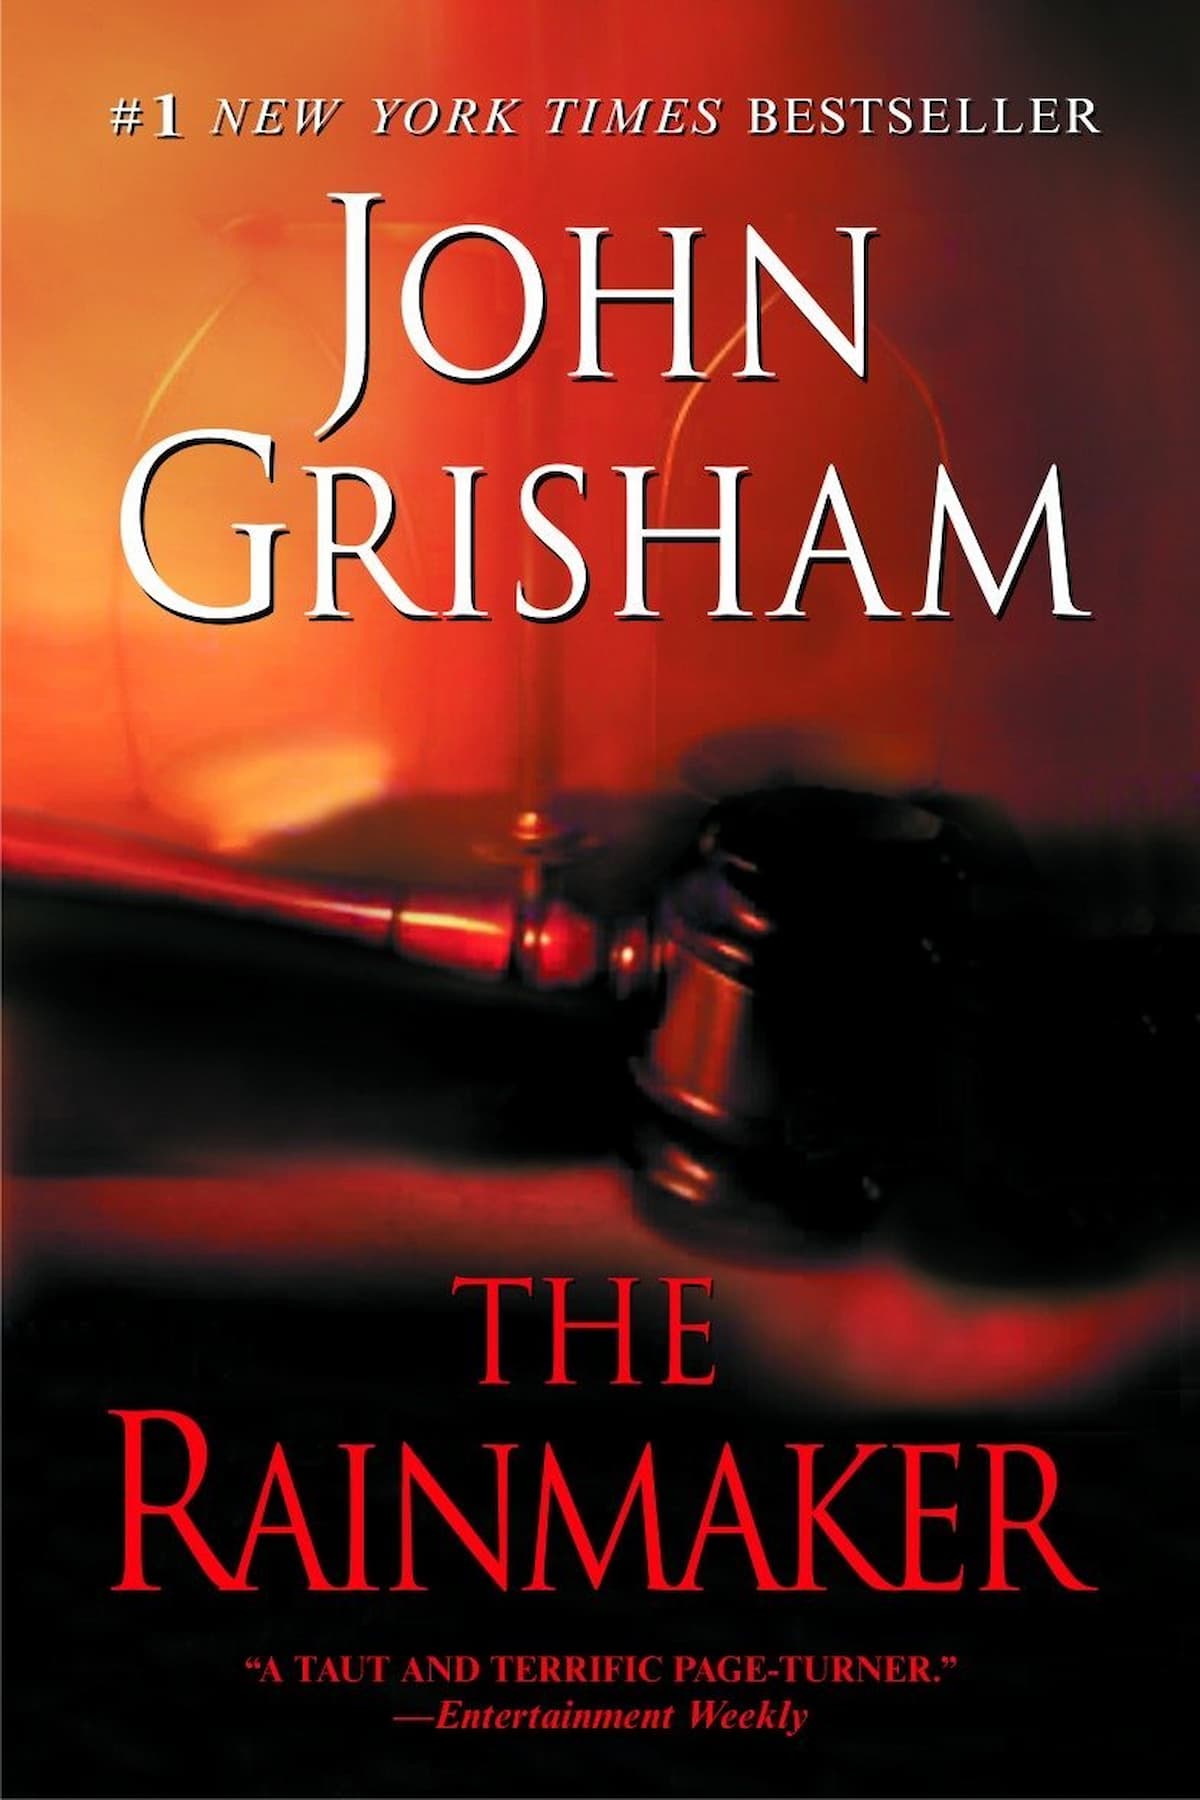 If you’re one who enjoys recharging your energies during the holidays, you’ll find "The Rainmaker - John Grisham" very helpful!